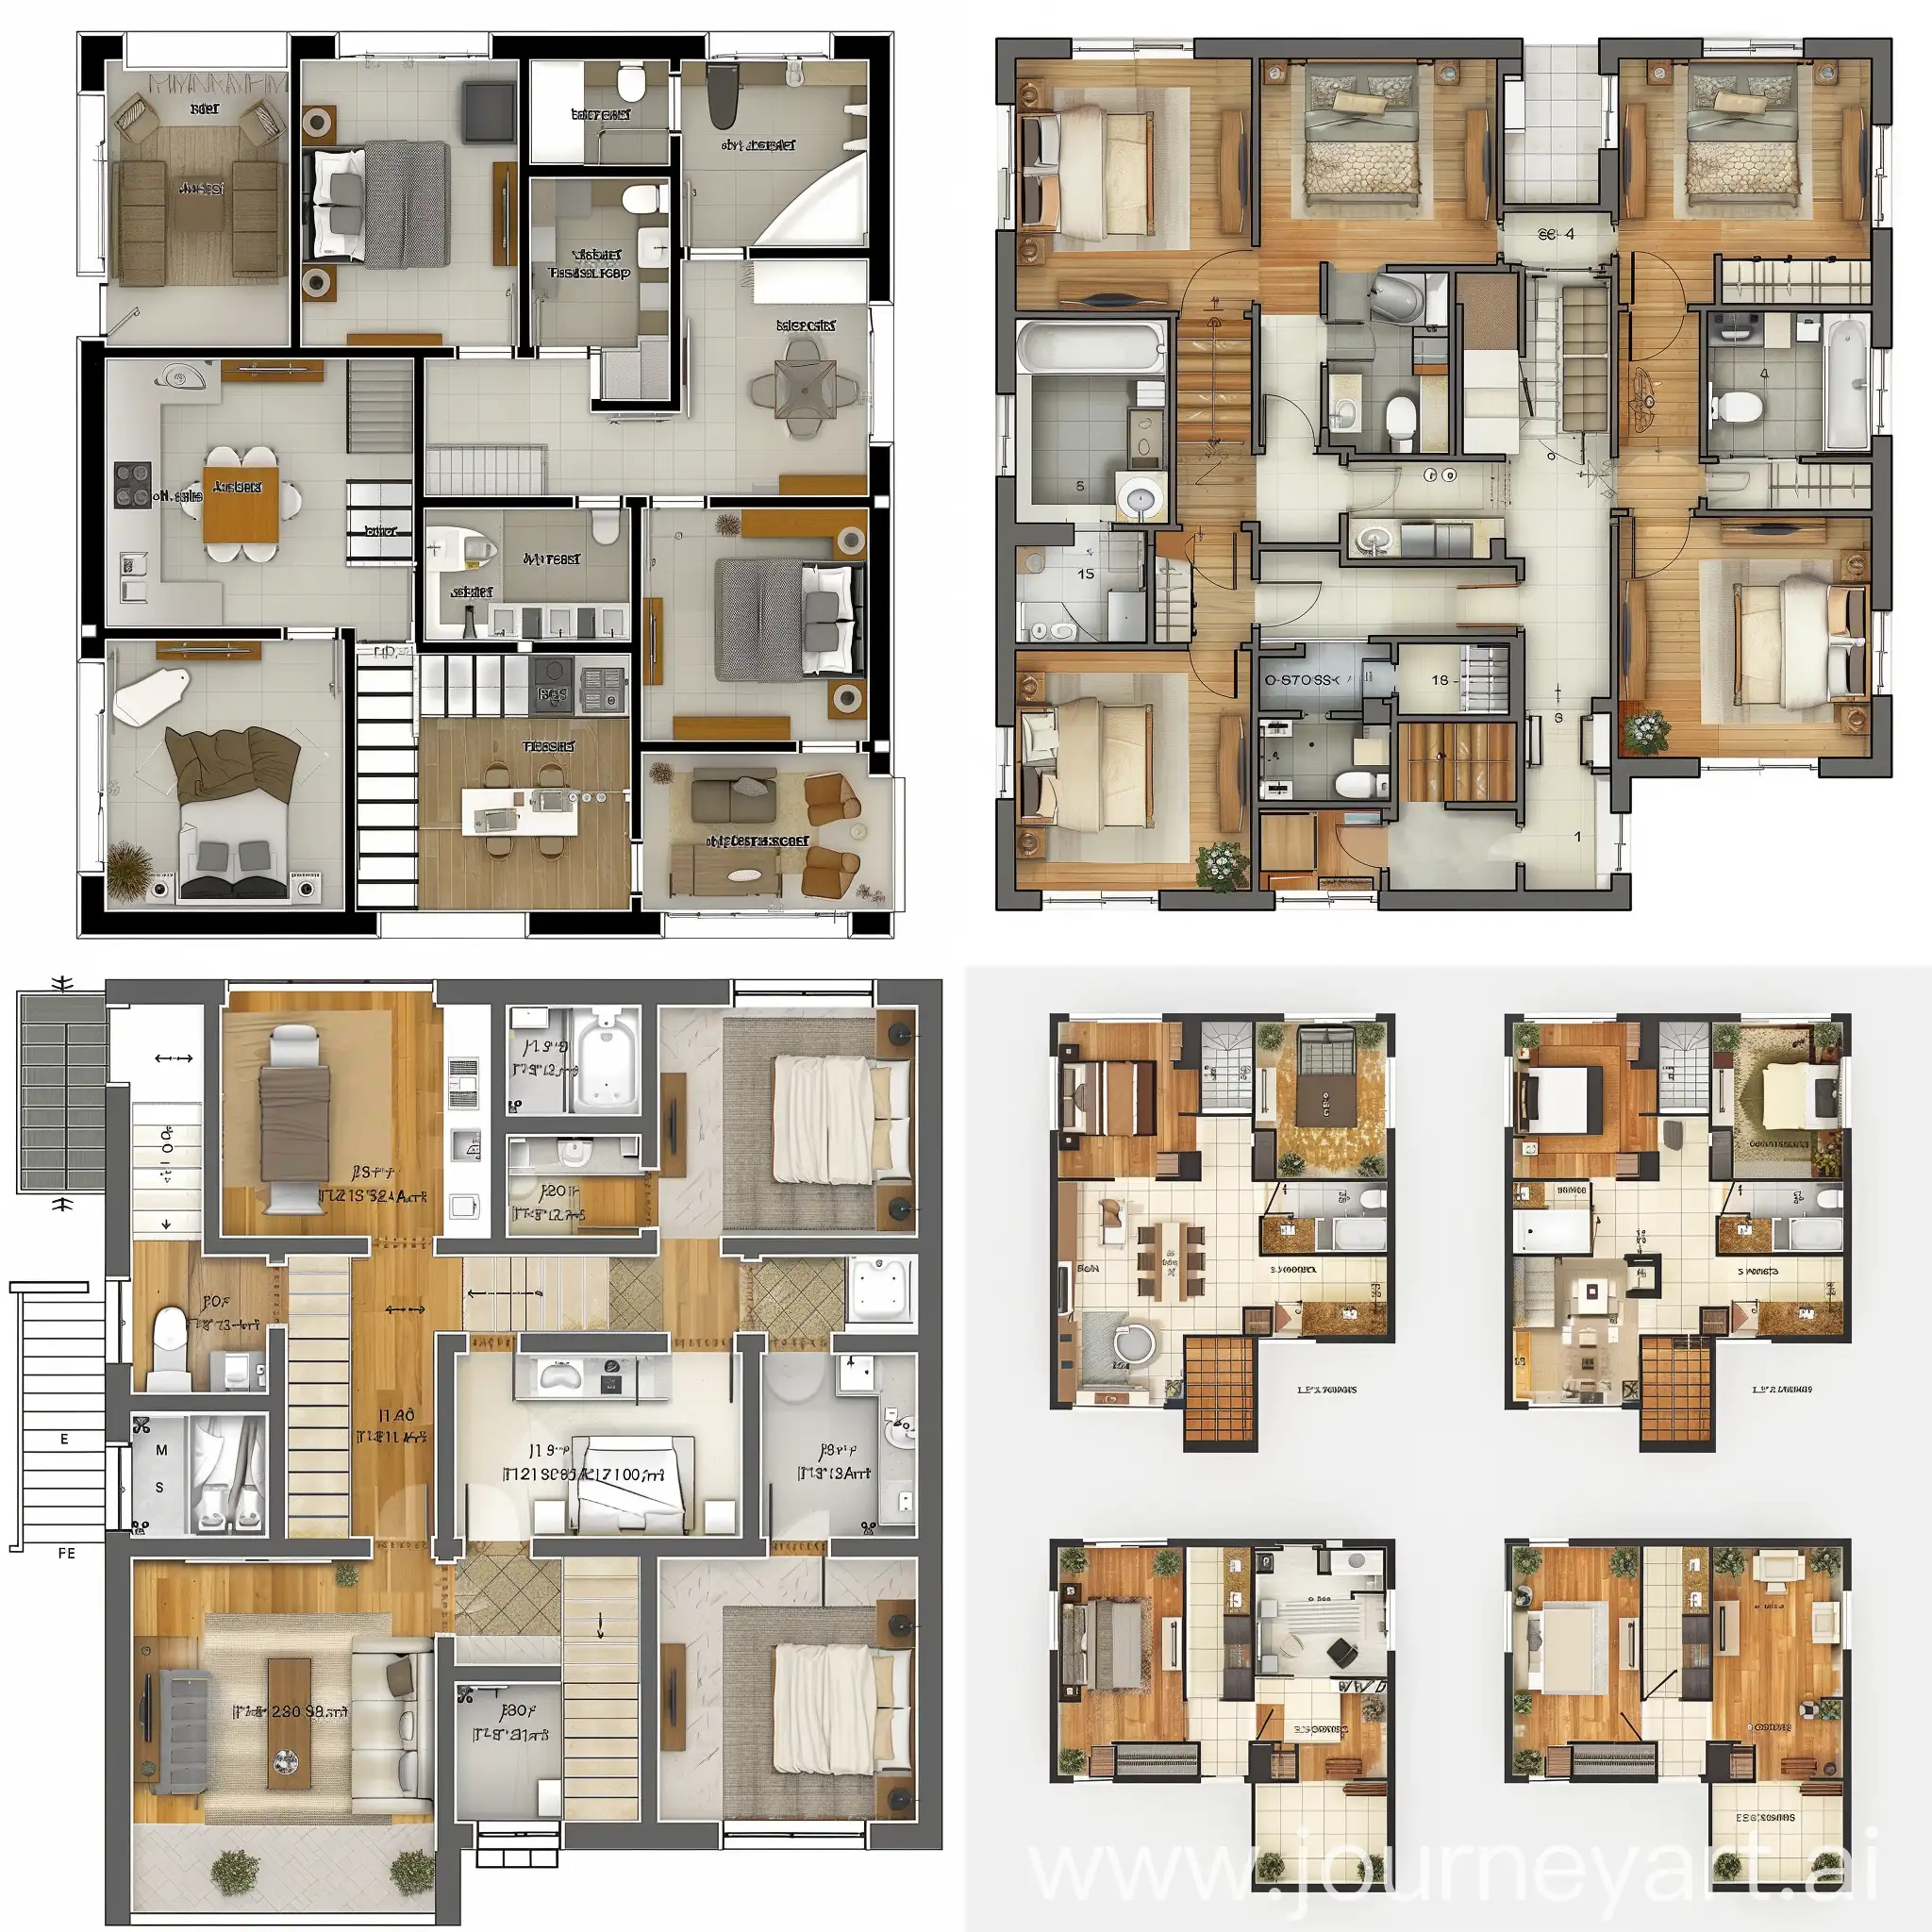 Rural-SelfBuilt-House-Floor-Plans-Spacious-Layout-with-Balconies-for-Drying-Clothes